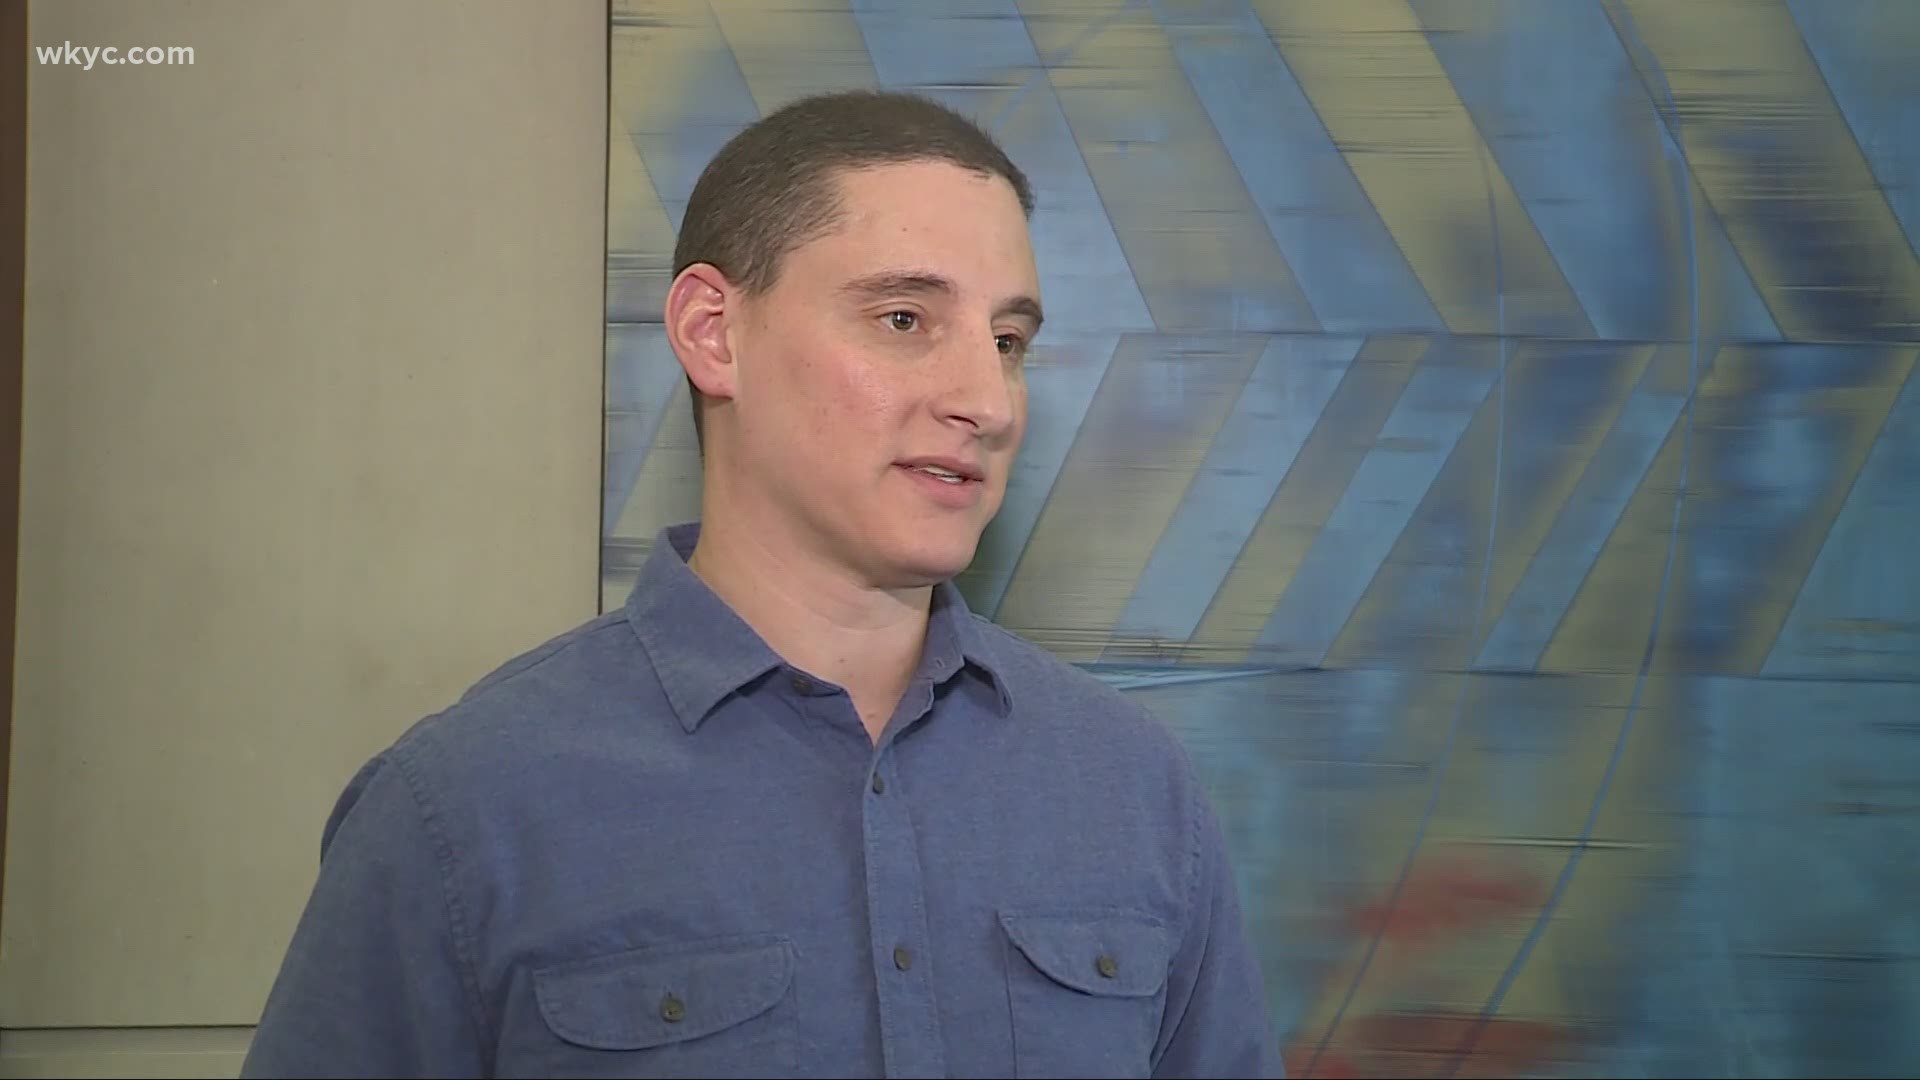 The race for next year's open U.S. Senate seat in Ohio has its first official Republican candidate and one with local ties. Mark Naymik talks with Josh Mandel.